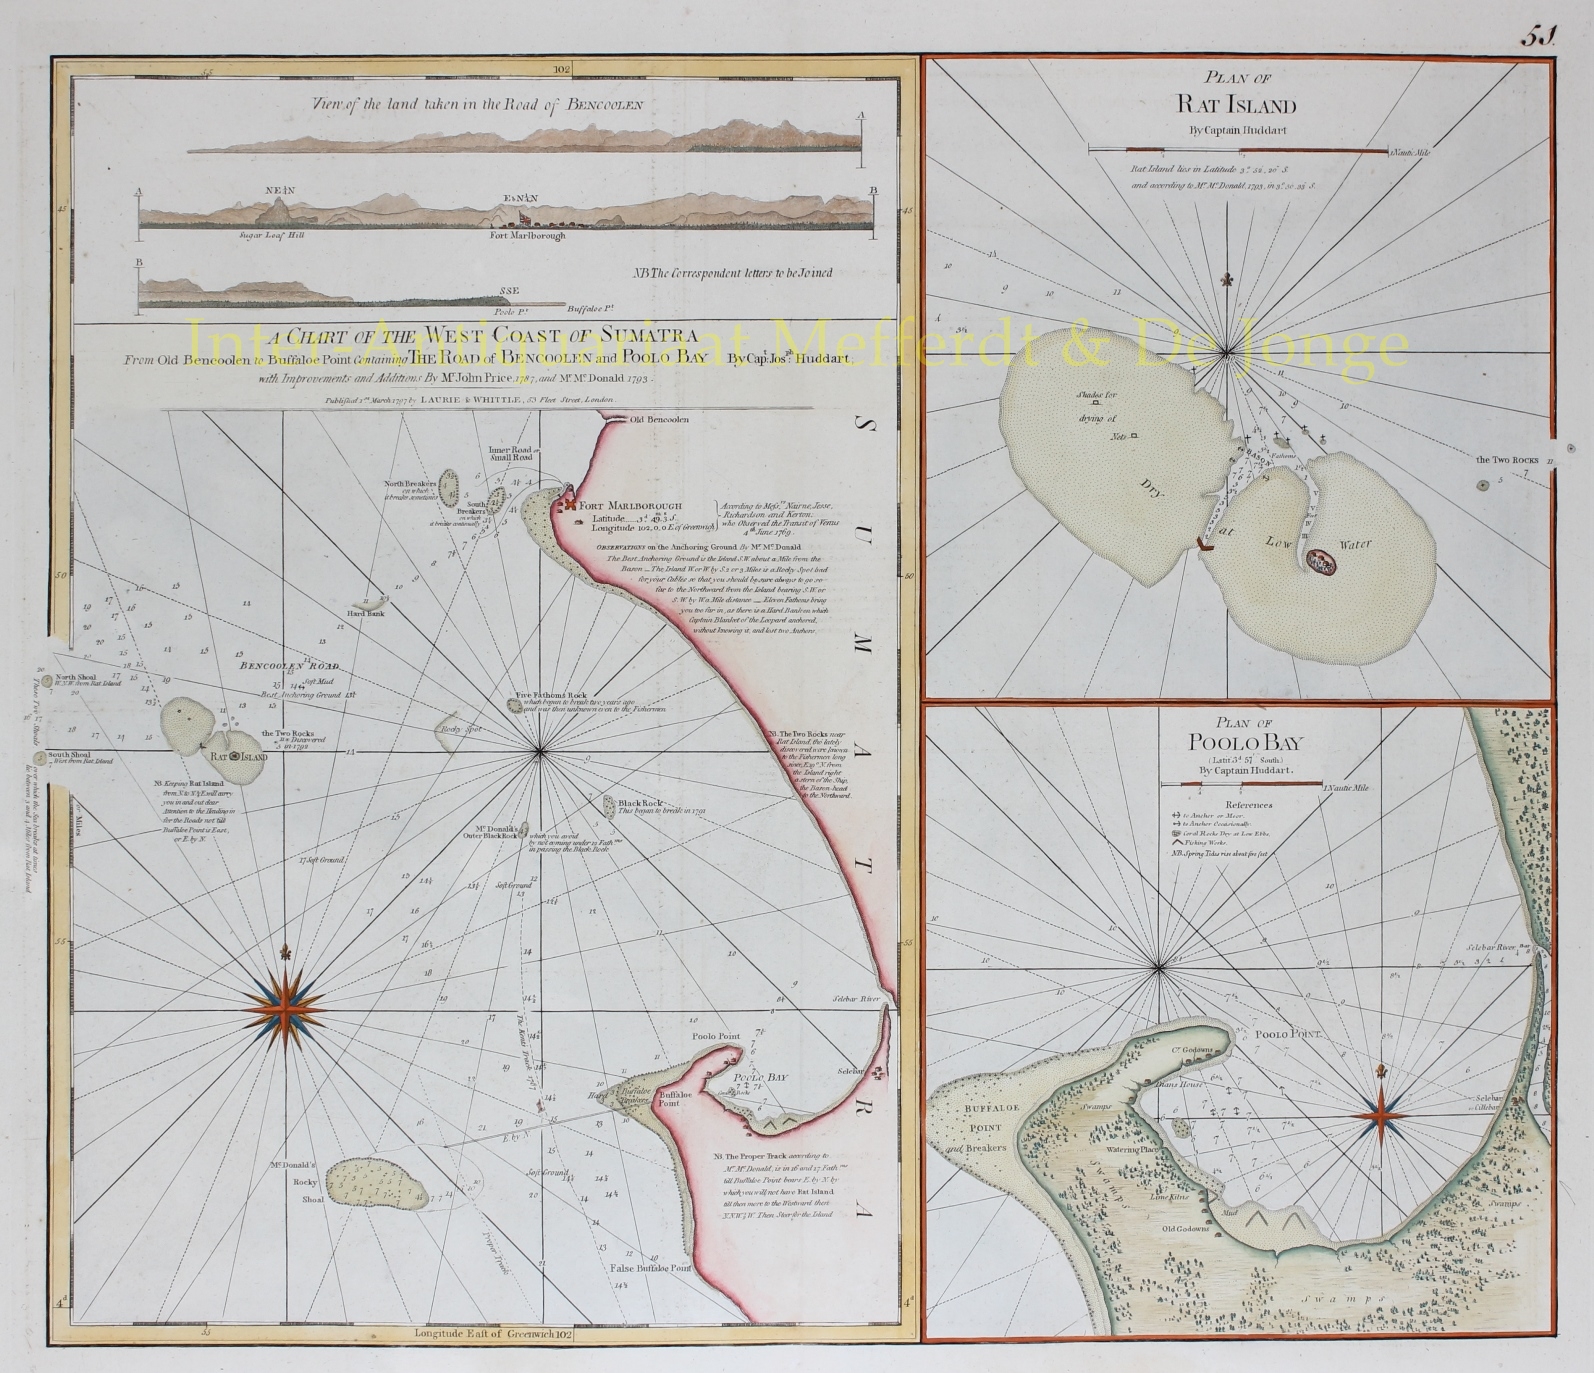 Laurie and Whittle - Indonesia, West Coast of Sumatra - Laurie and Whittle, 1794